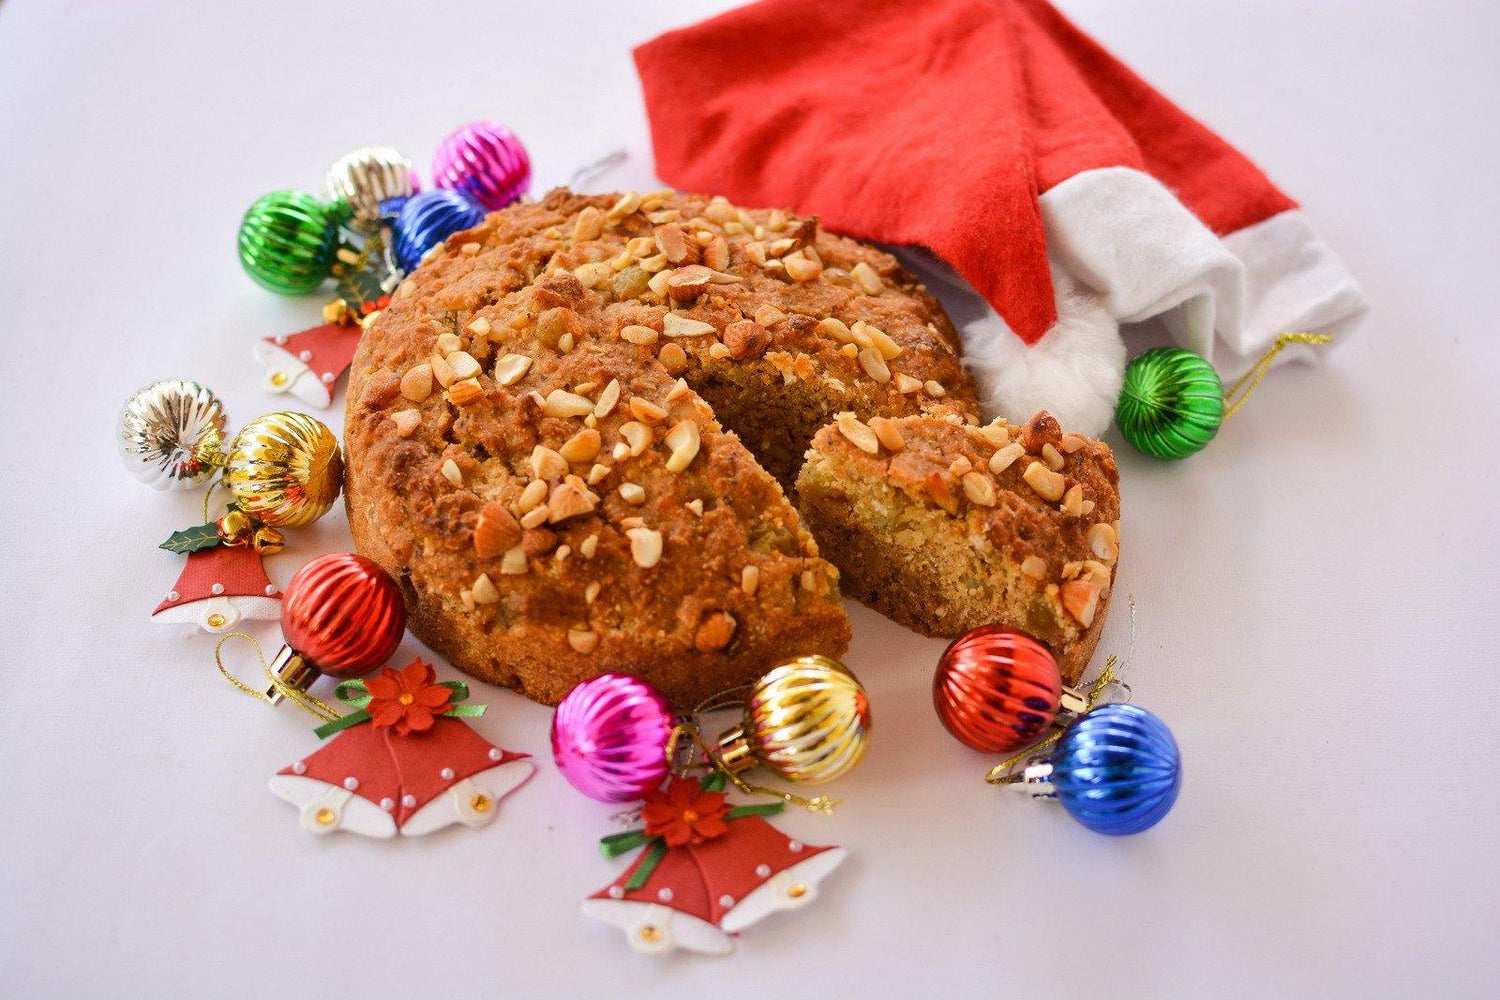 Dry Fruit and Nut Christmas Cake - Fruit Sweetened, no Alcohol - 550g - Sampoorna Ahara - Healthy Food, Food Delivery, Food Order Online, Healthy Snacks, Healthy Breakfast, Sourdough Breads, Sugar-free Desserts